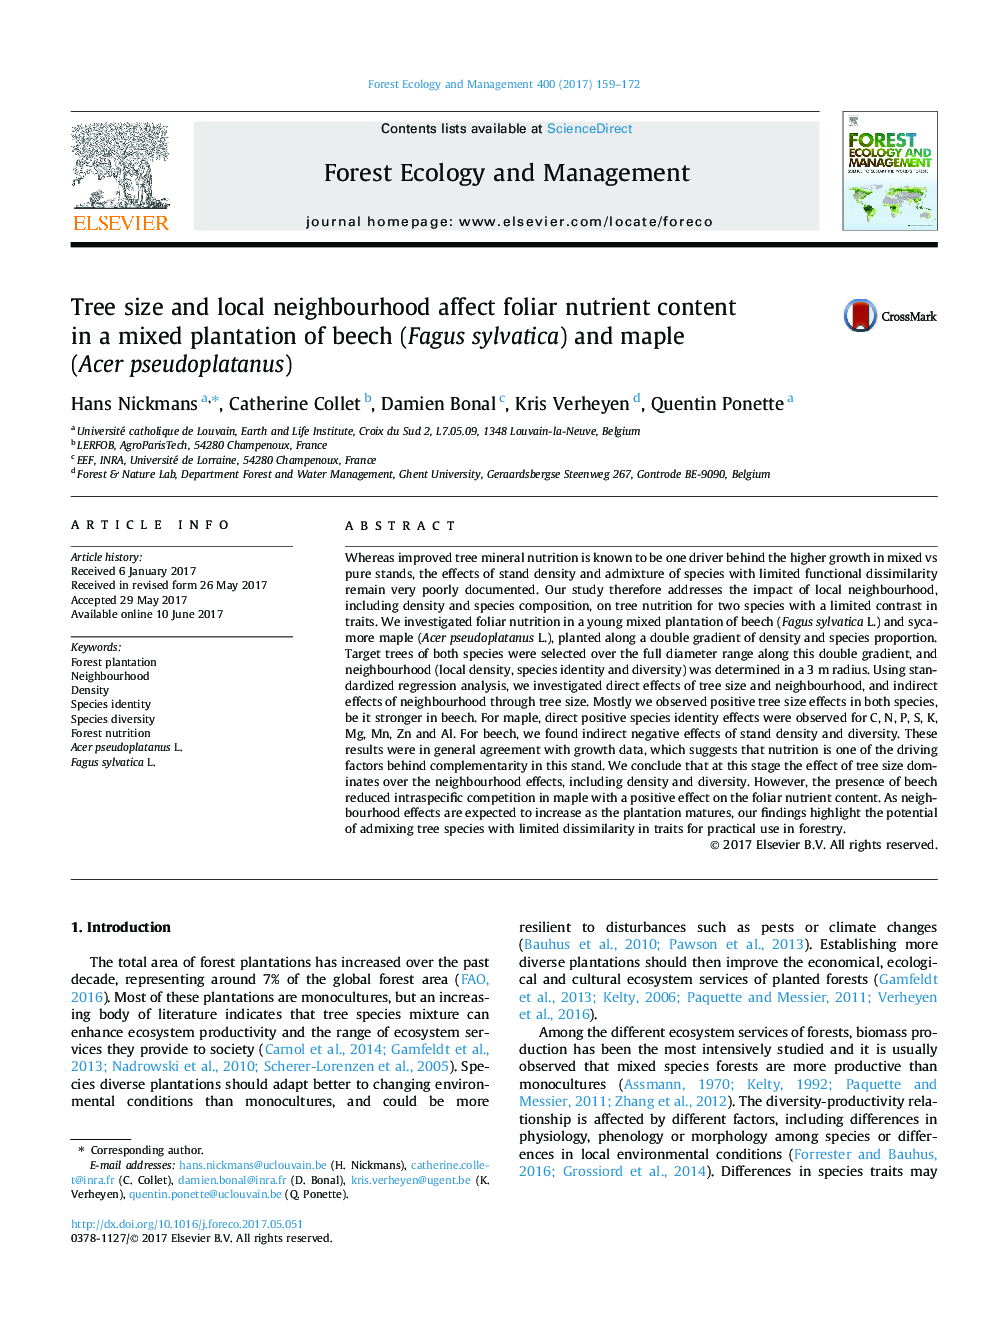 Tree size and local neighbourhood affect foliar nutrient content in a mixed plantation of beech (Fagus sylvatica) and maple (Acer pseudoplatanus)